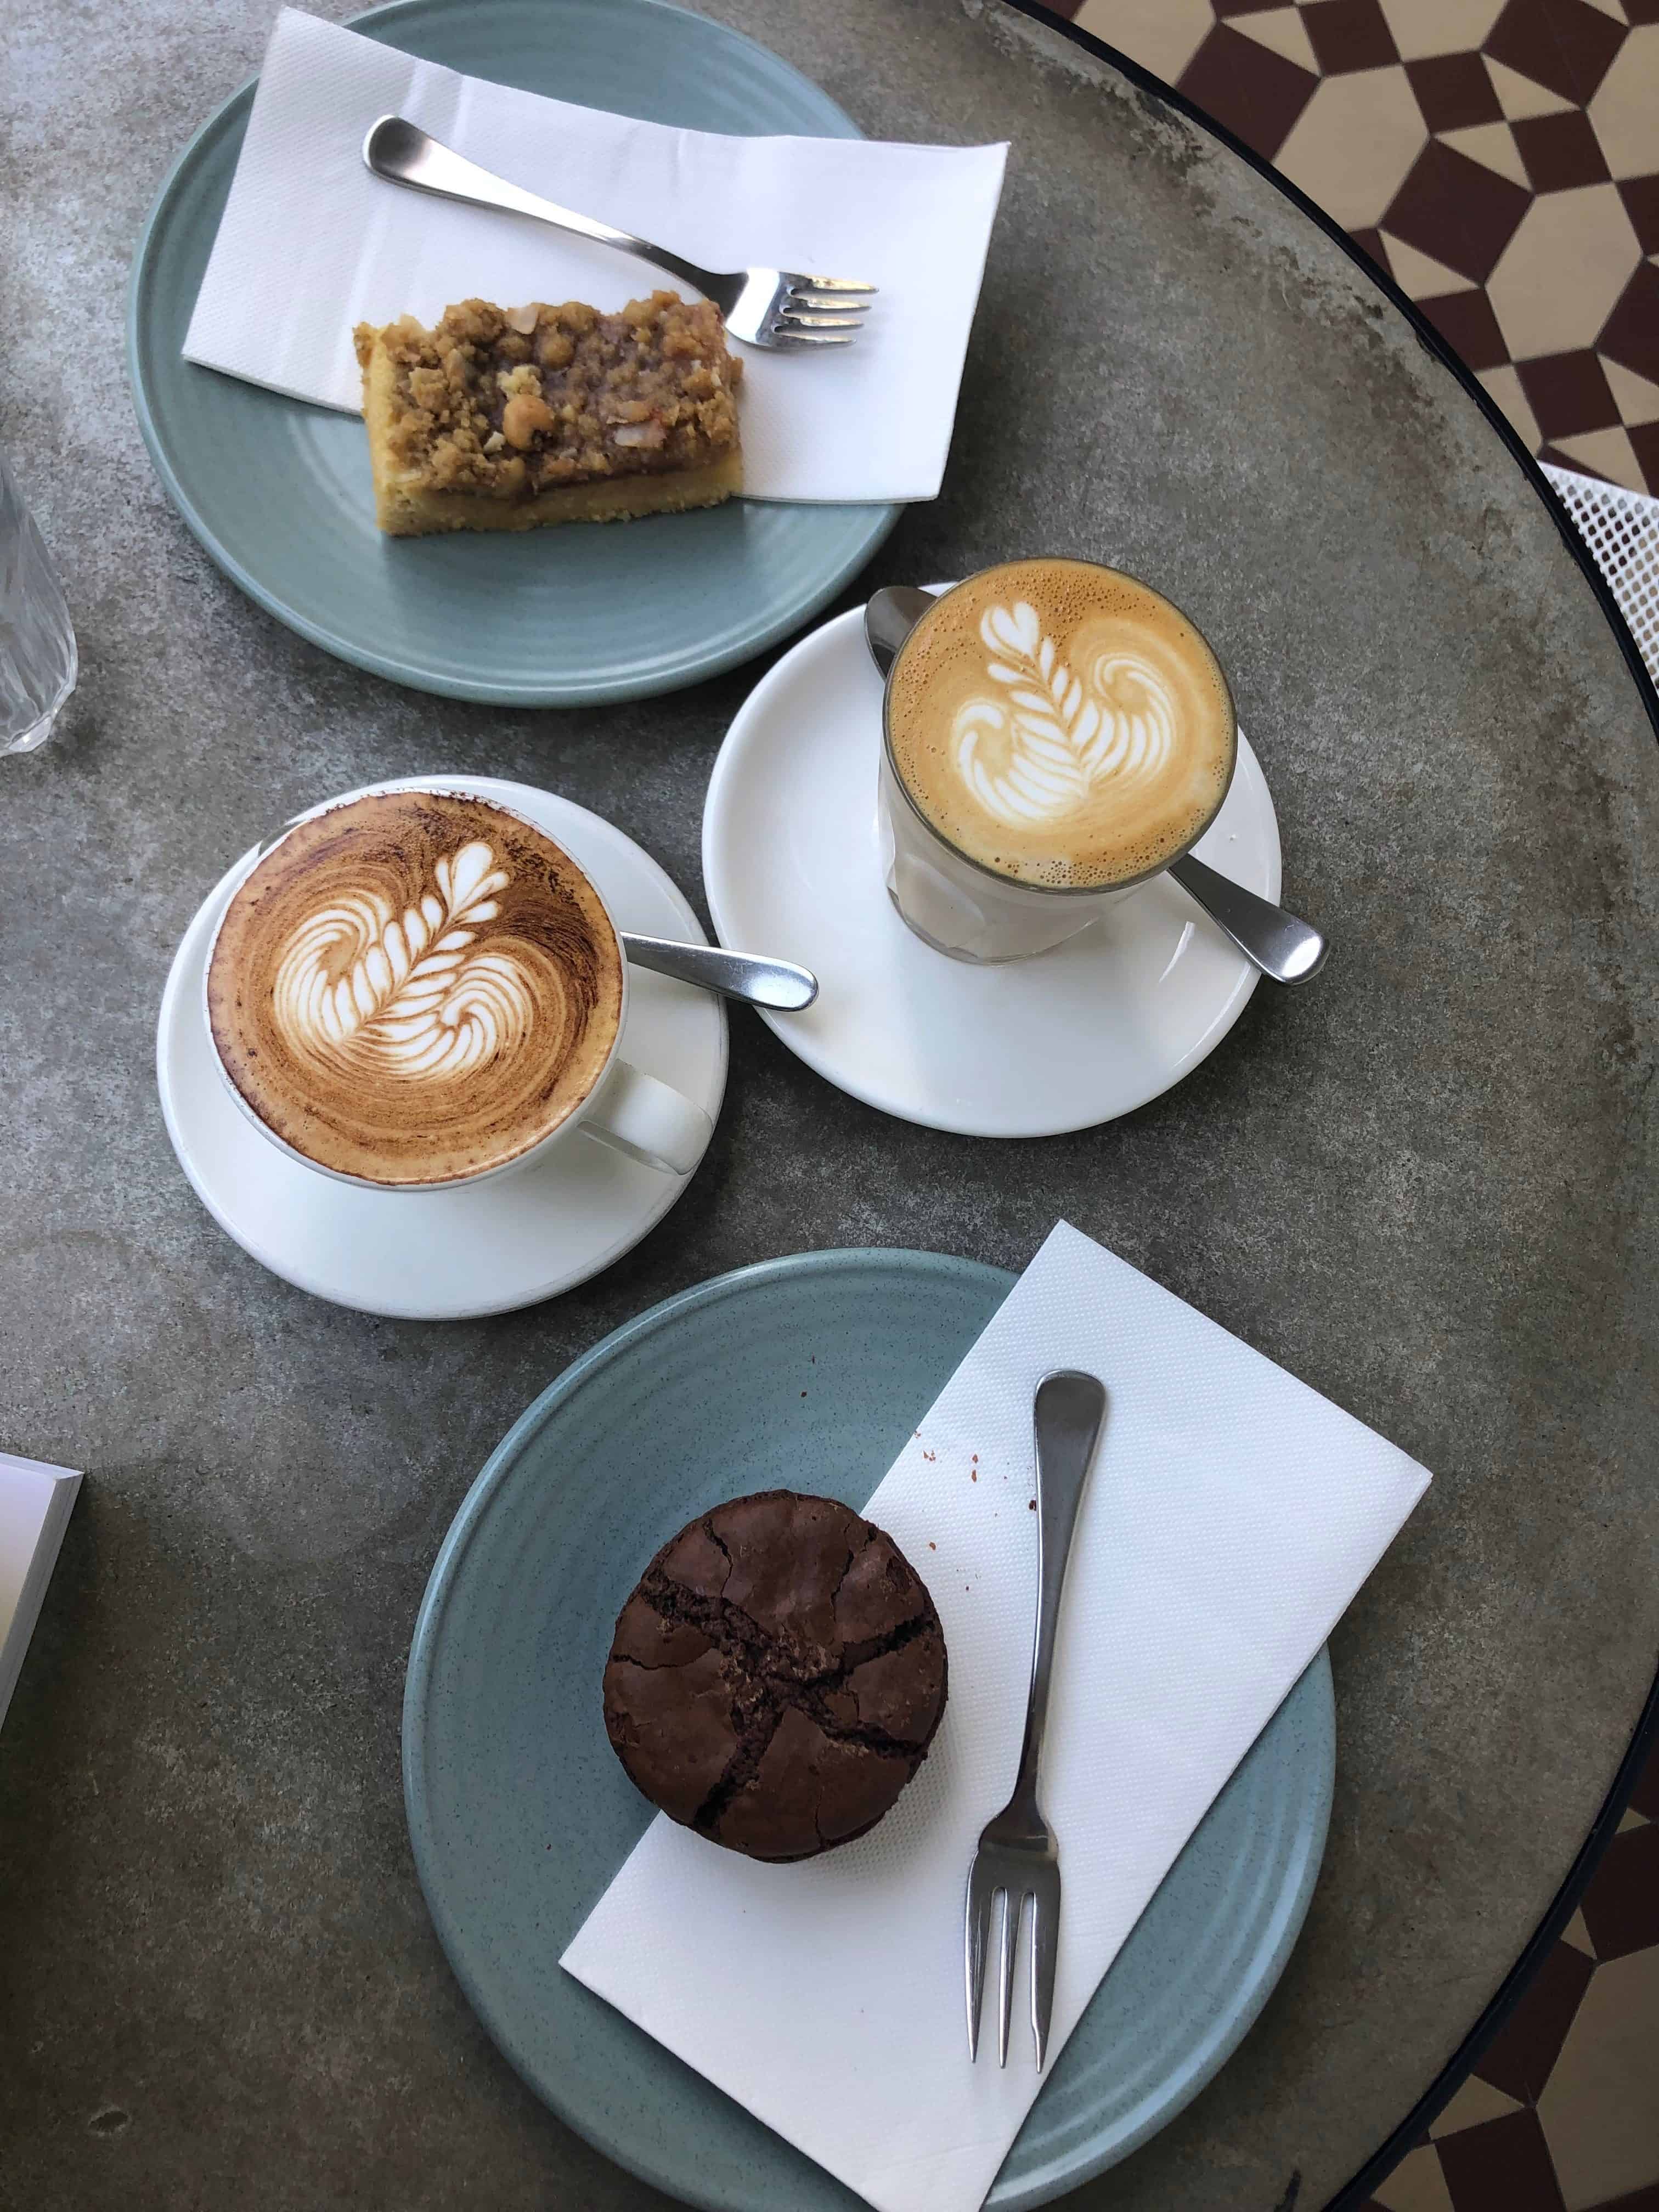 Coffee and cake from The Kettle Black, Melbourne